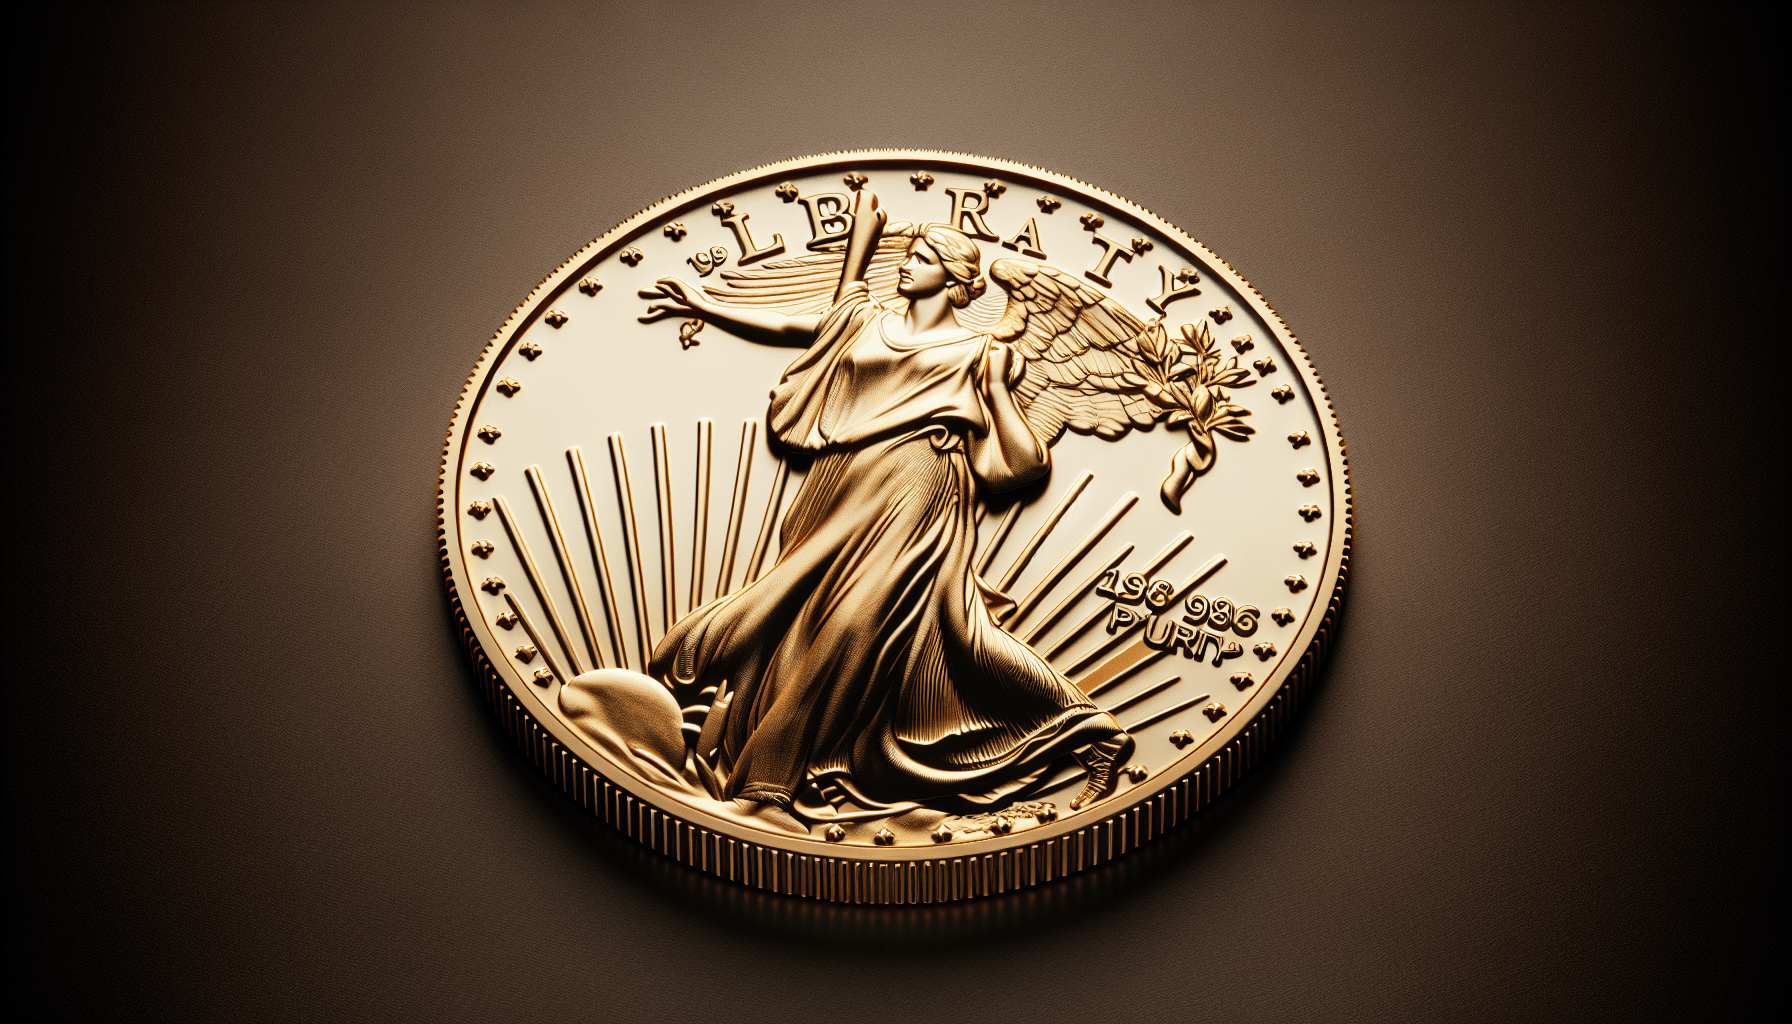 1986 American Eagle Gold Coin Review